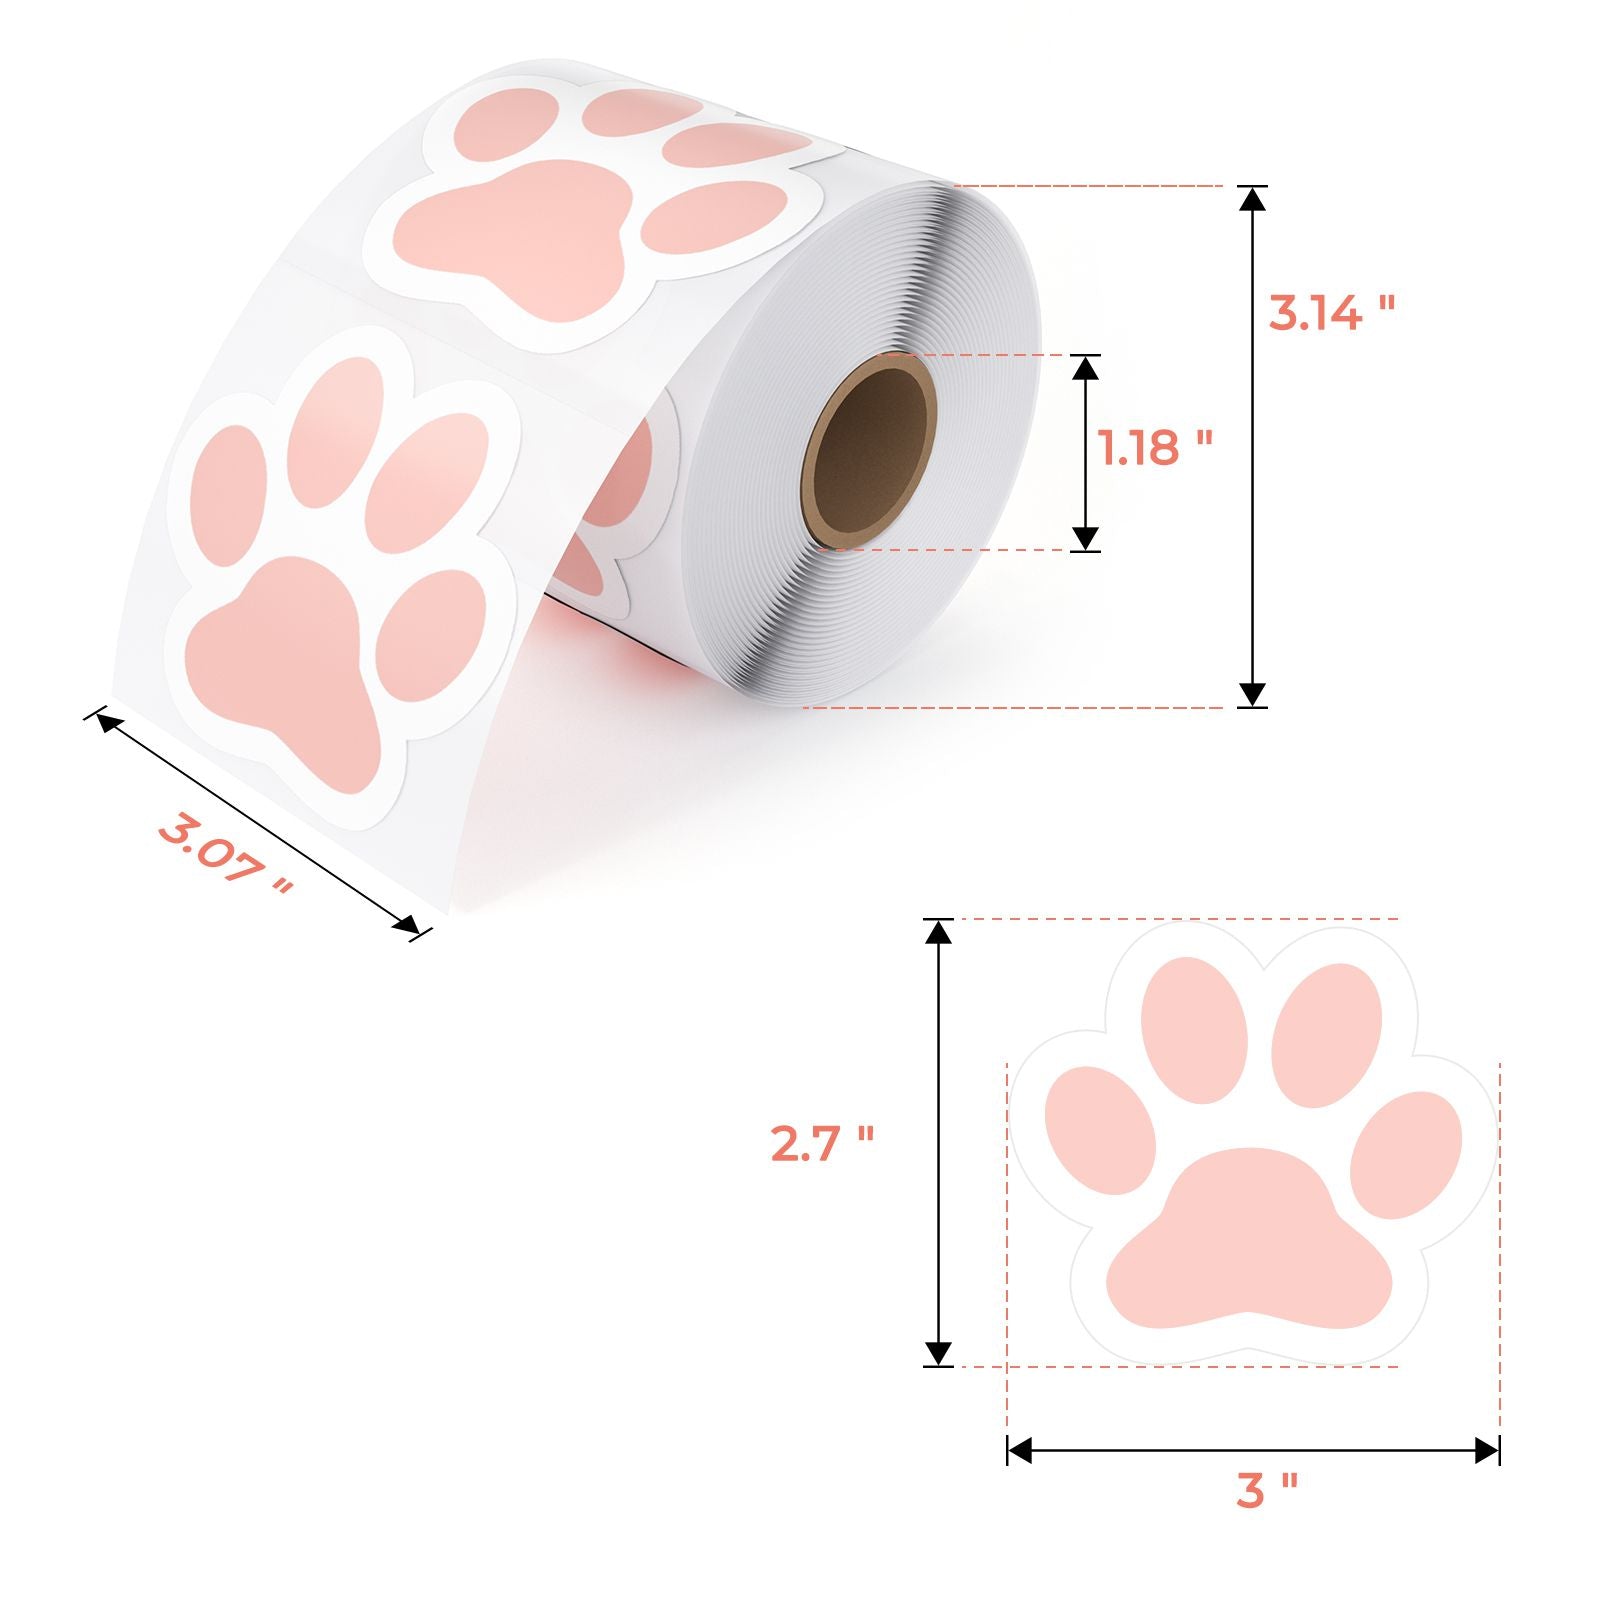 Made from high-quality thermal paper, these MUNBYN paw print labels produce clear and precise printing with any thermal printer.